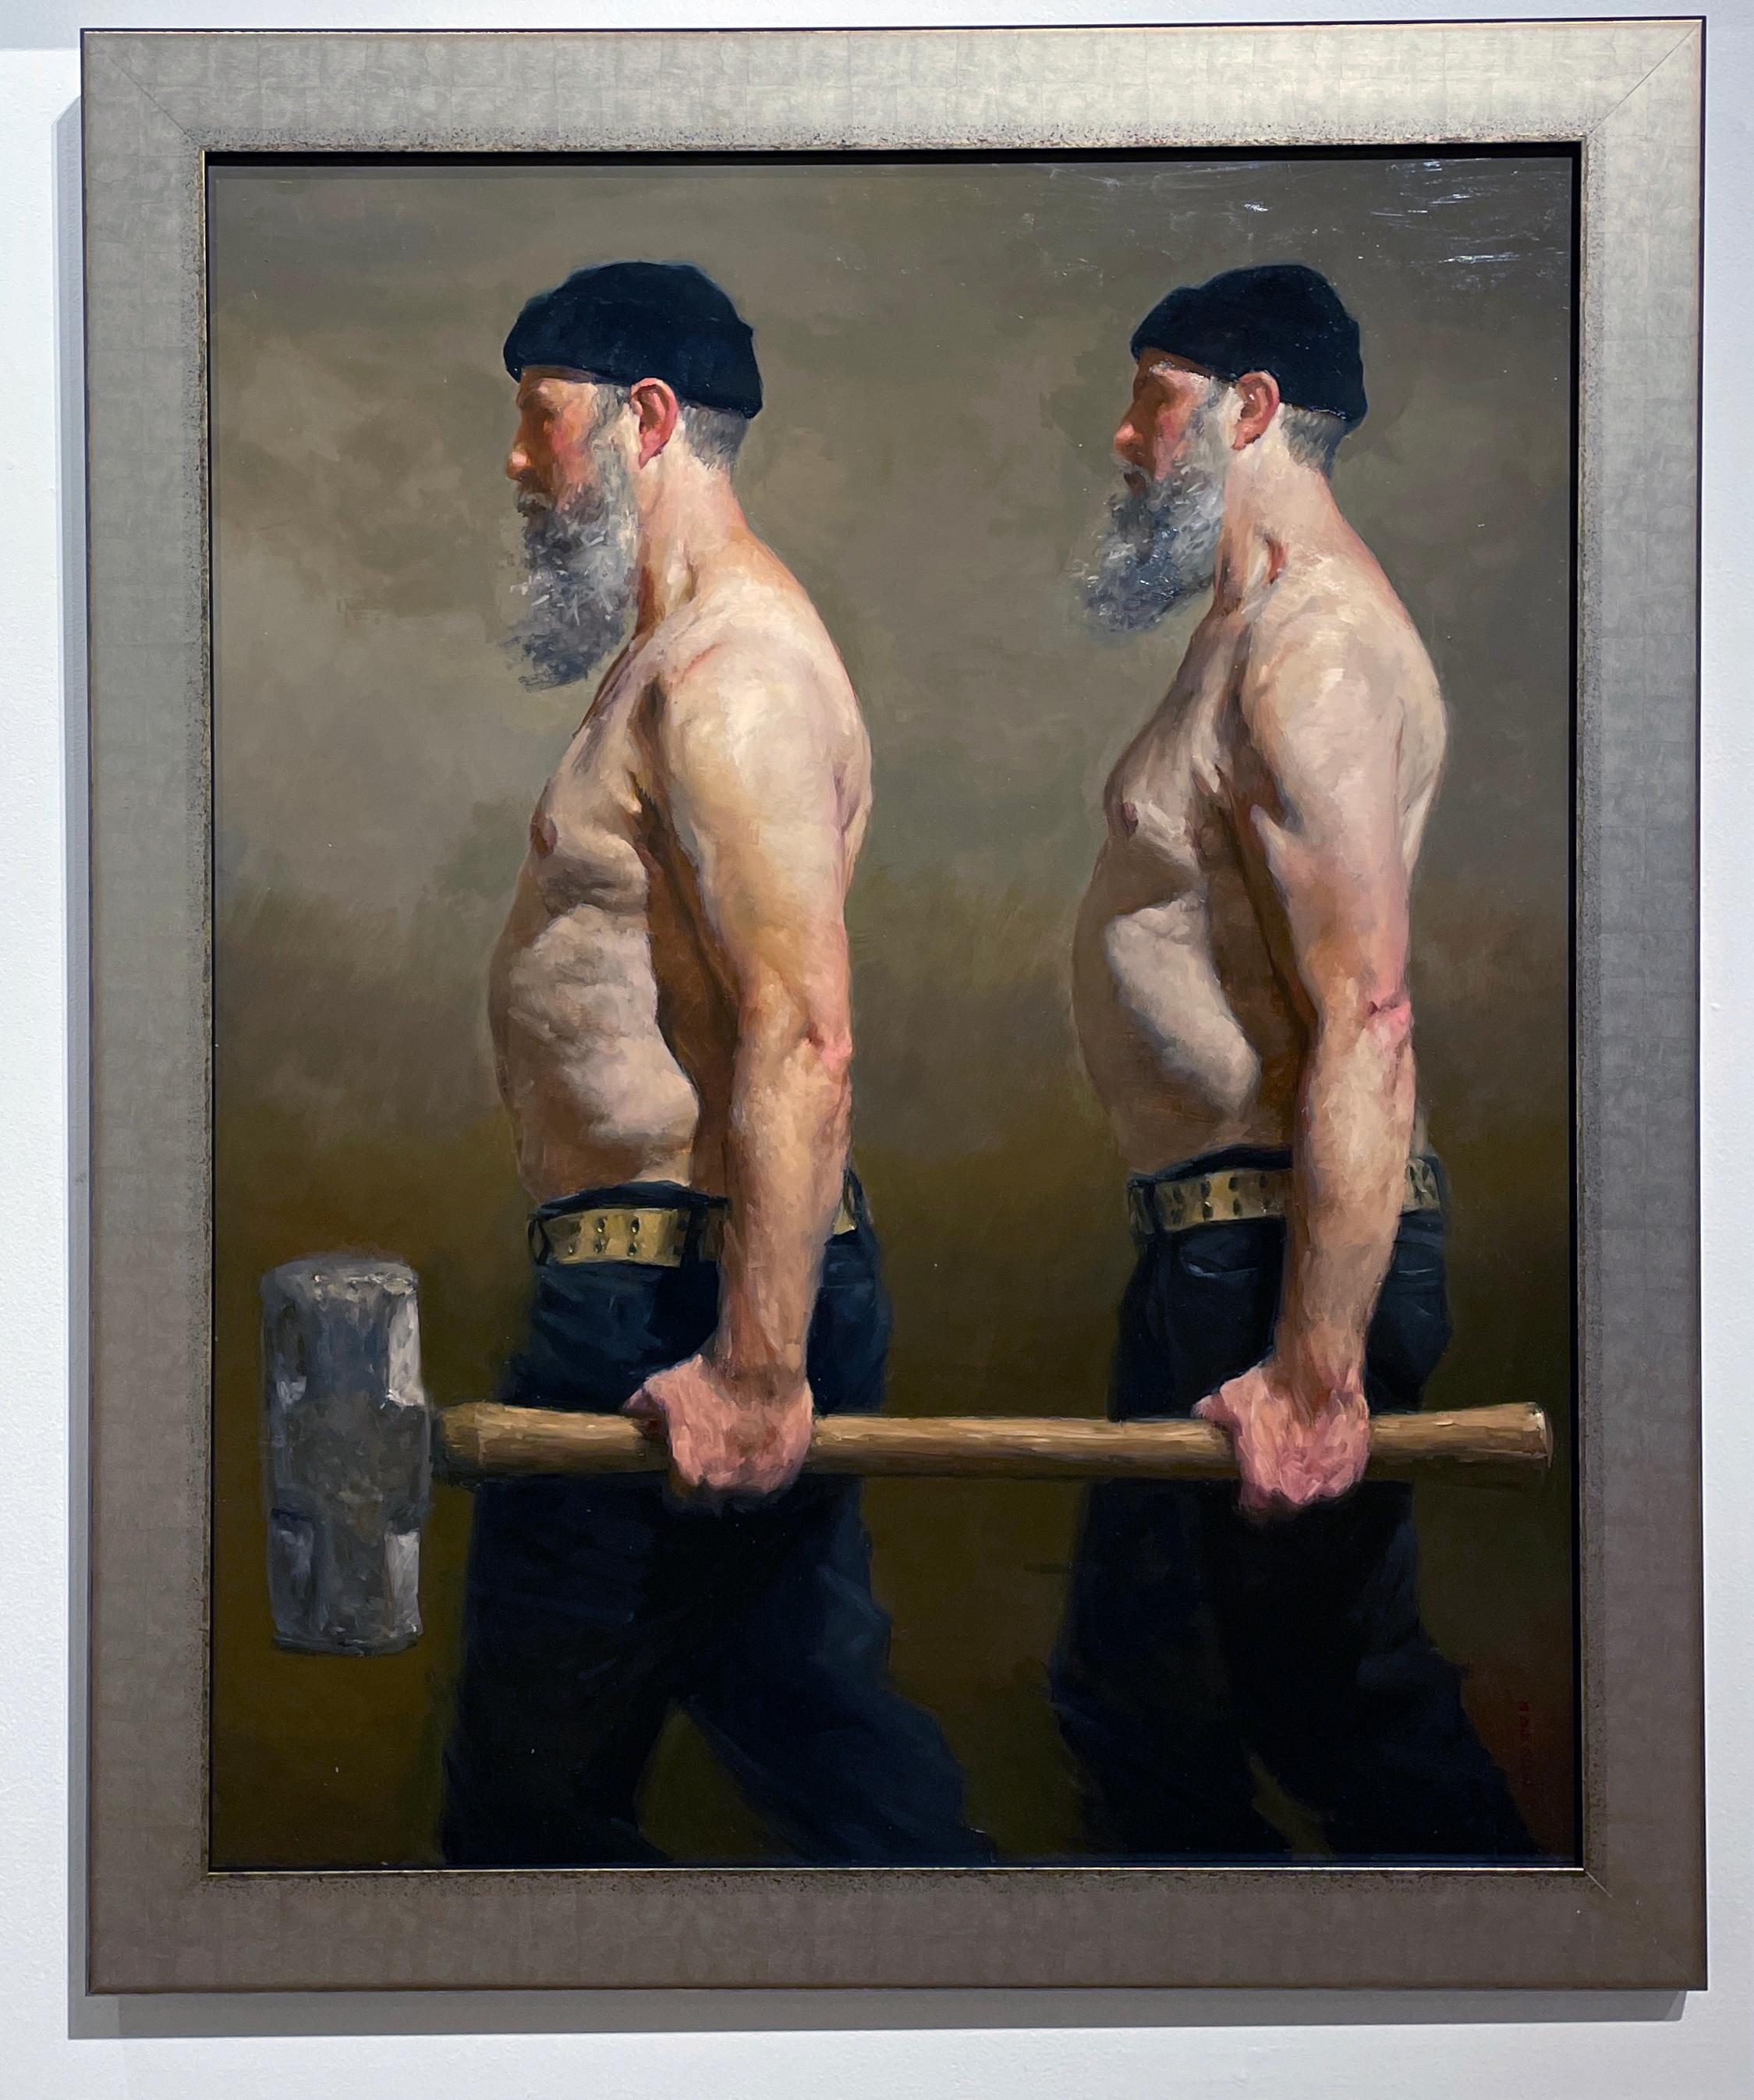 Sledge Bearers, Two Men Holding a Sledge Hammer, Original Oil on Panel - Painting by Zack Zdrale